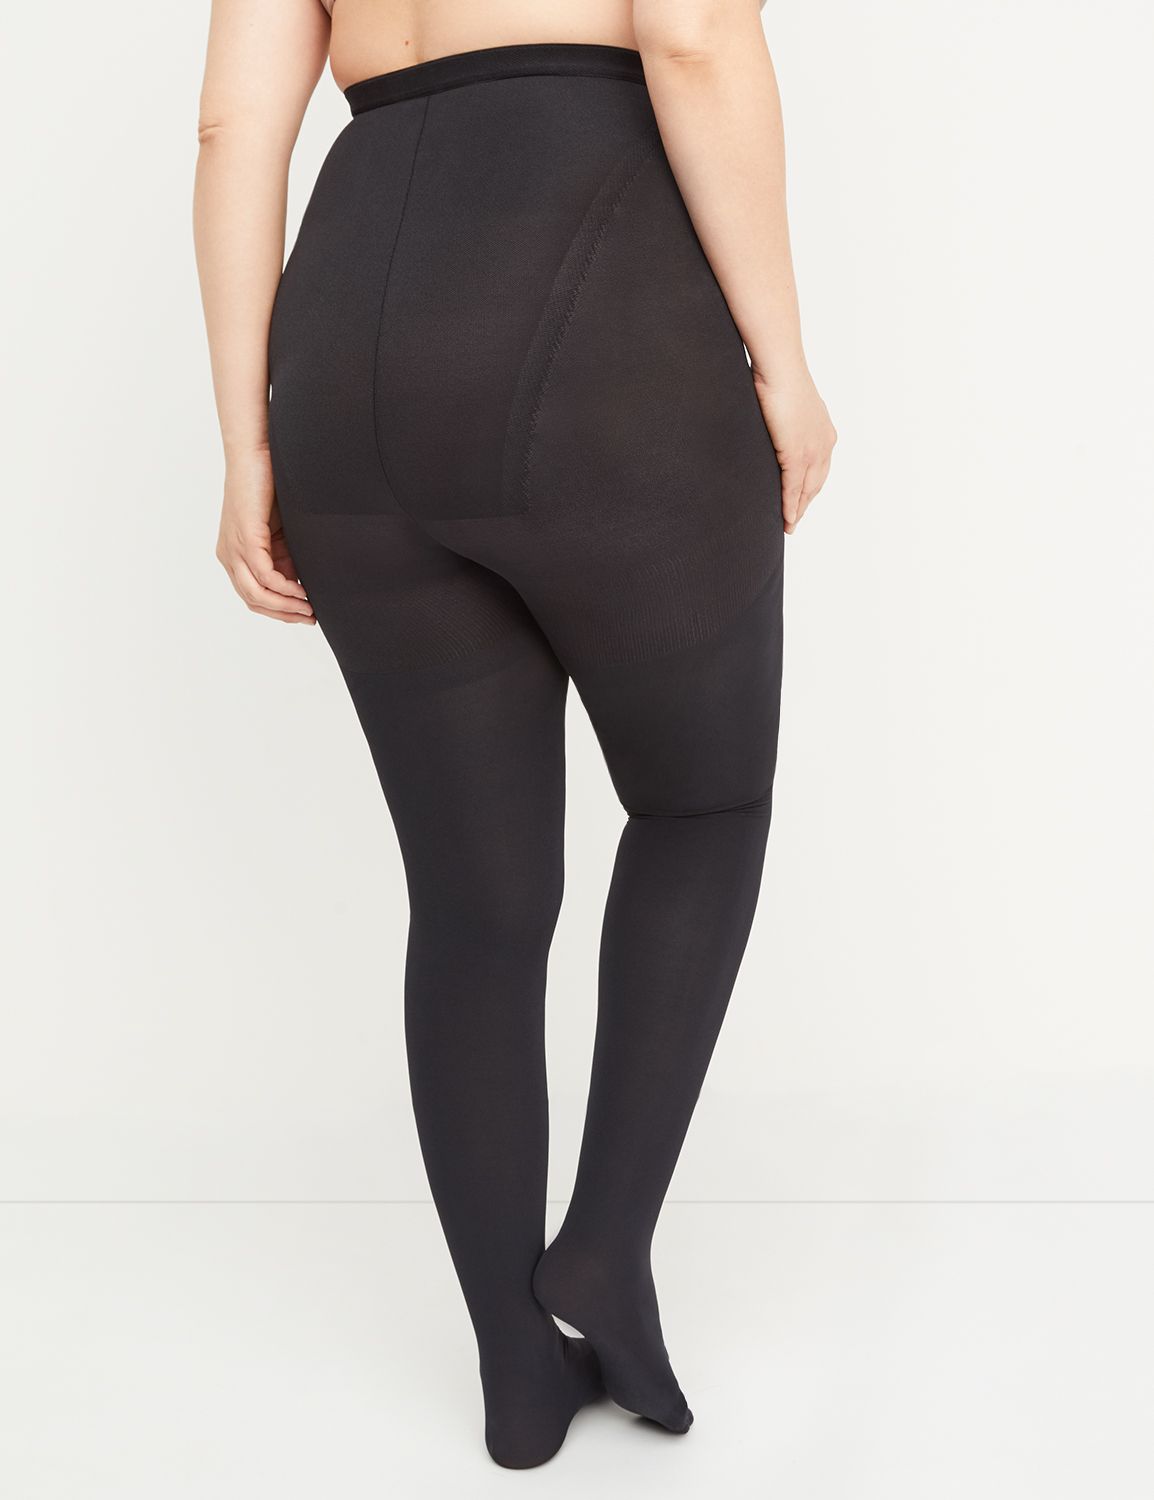 - D Opaque Tights | LaneBryant